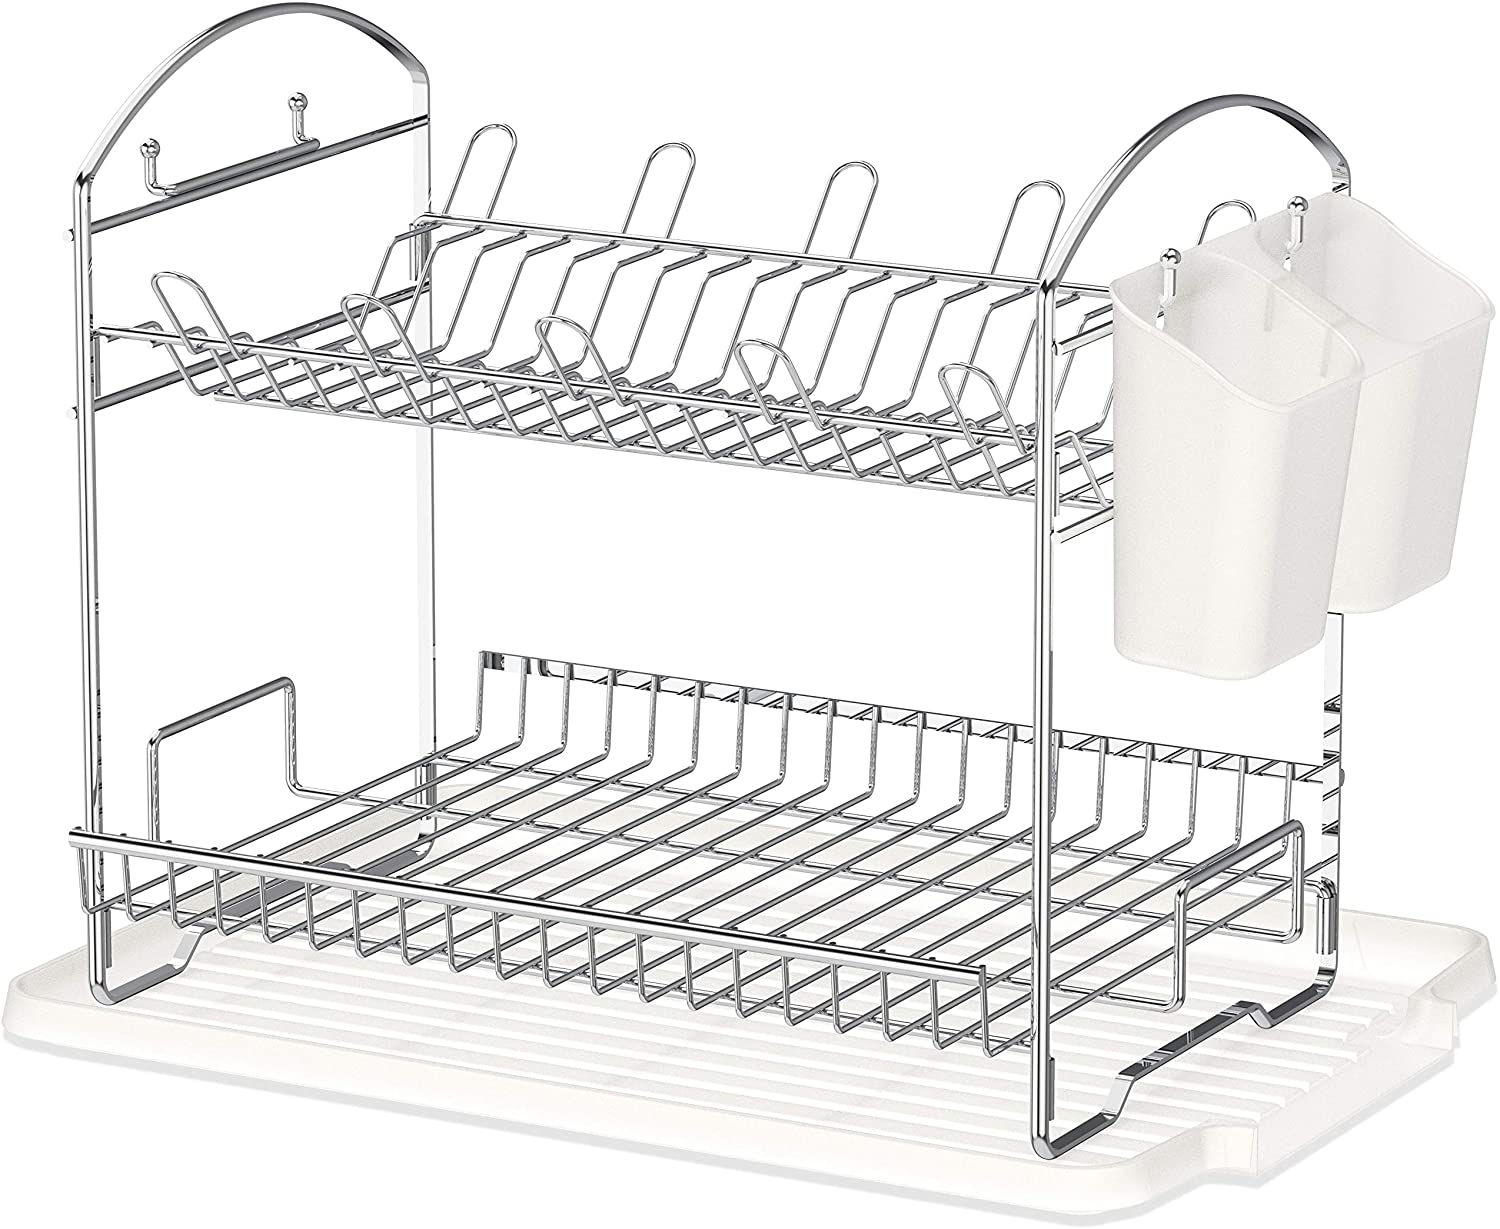 2-Tier Dish Rack with Drainboard 